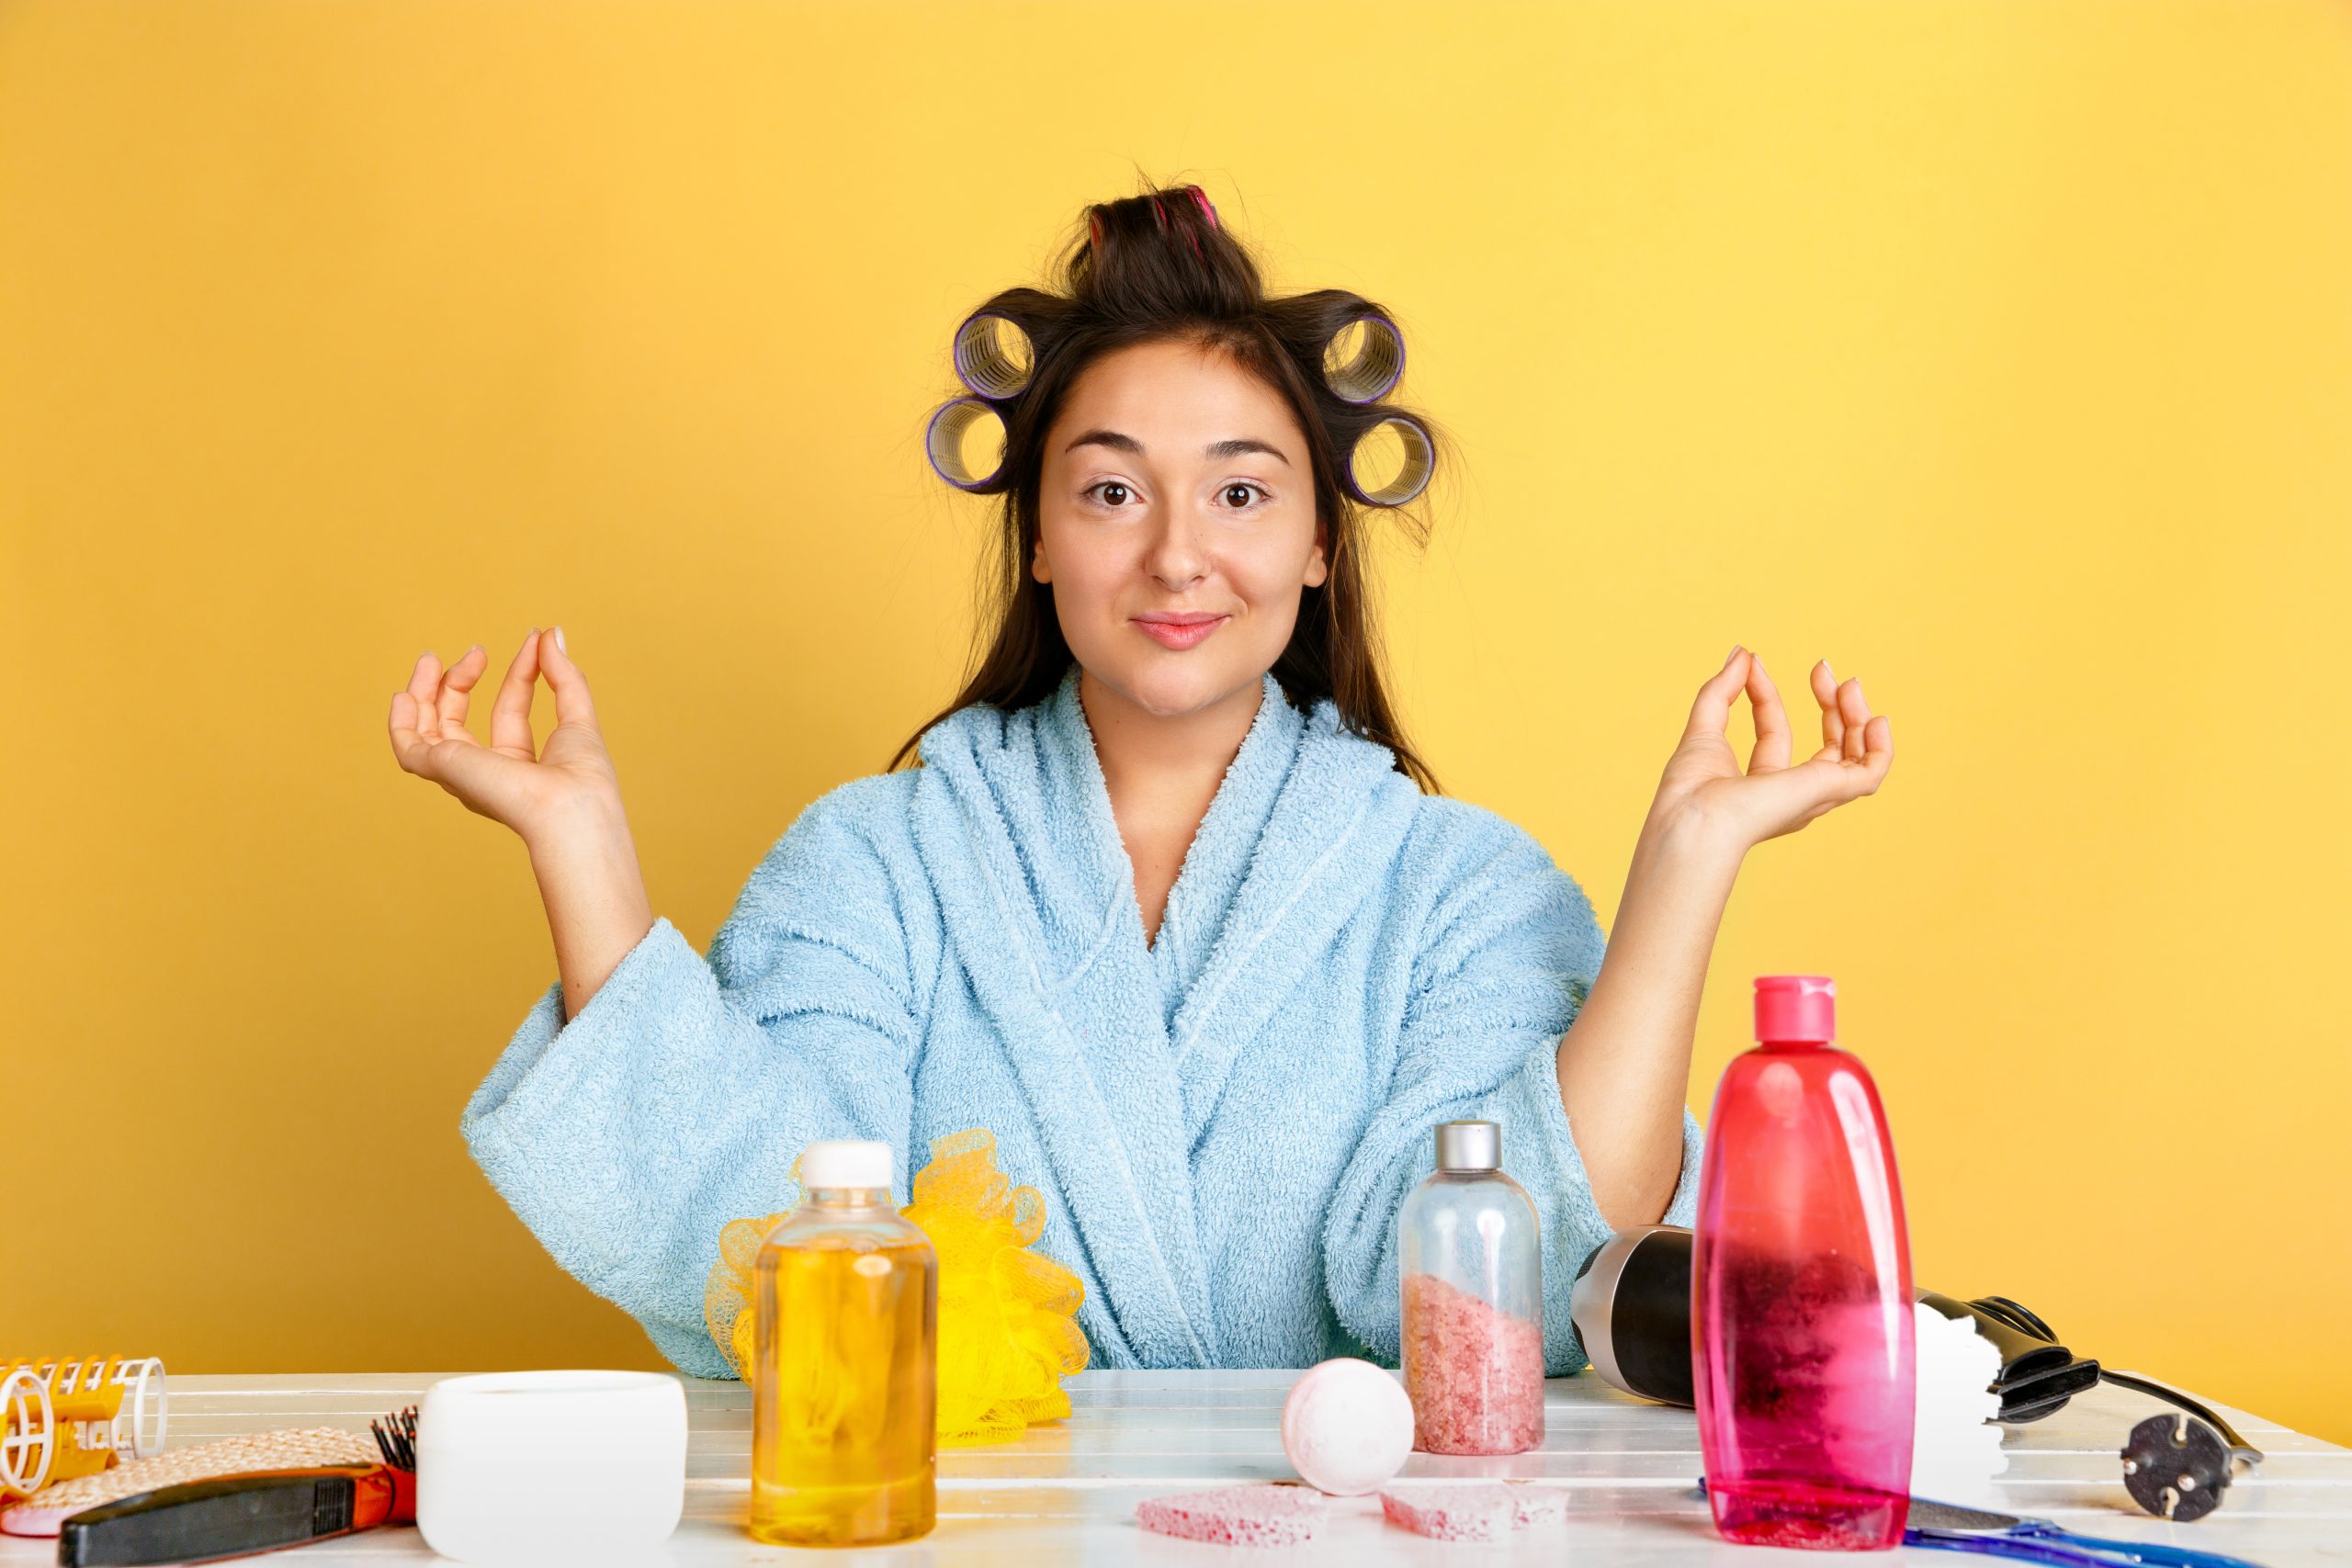 How To Choose The Right Hair Products For Your Hair Type: Dermatologist Advice